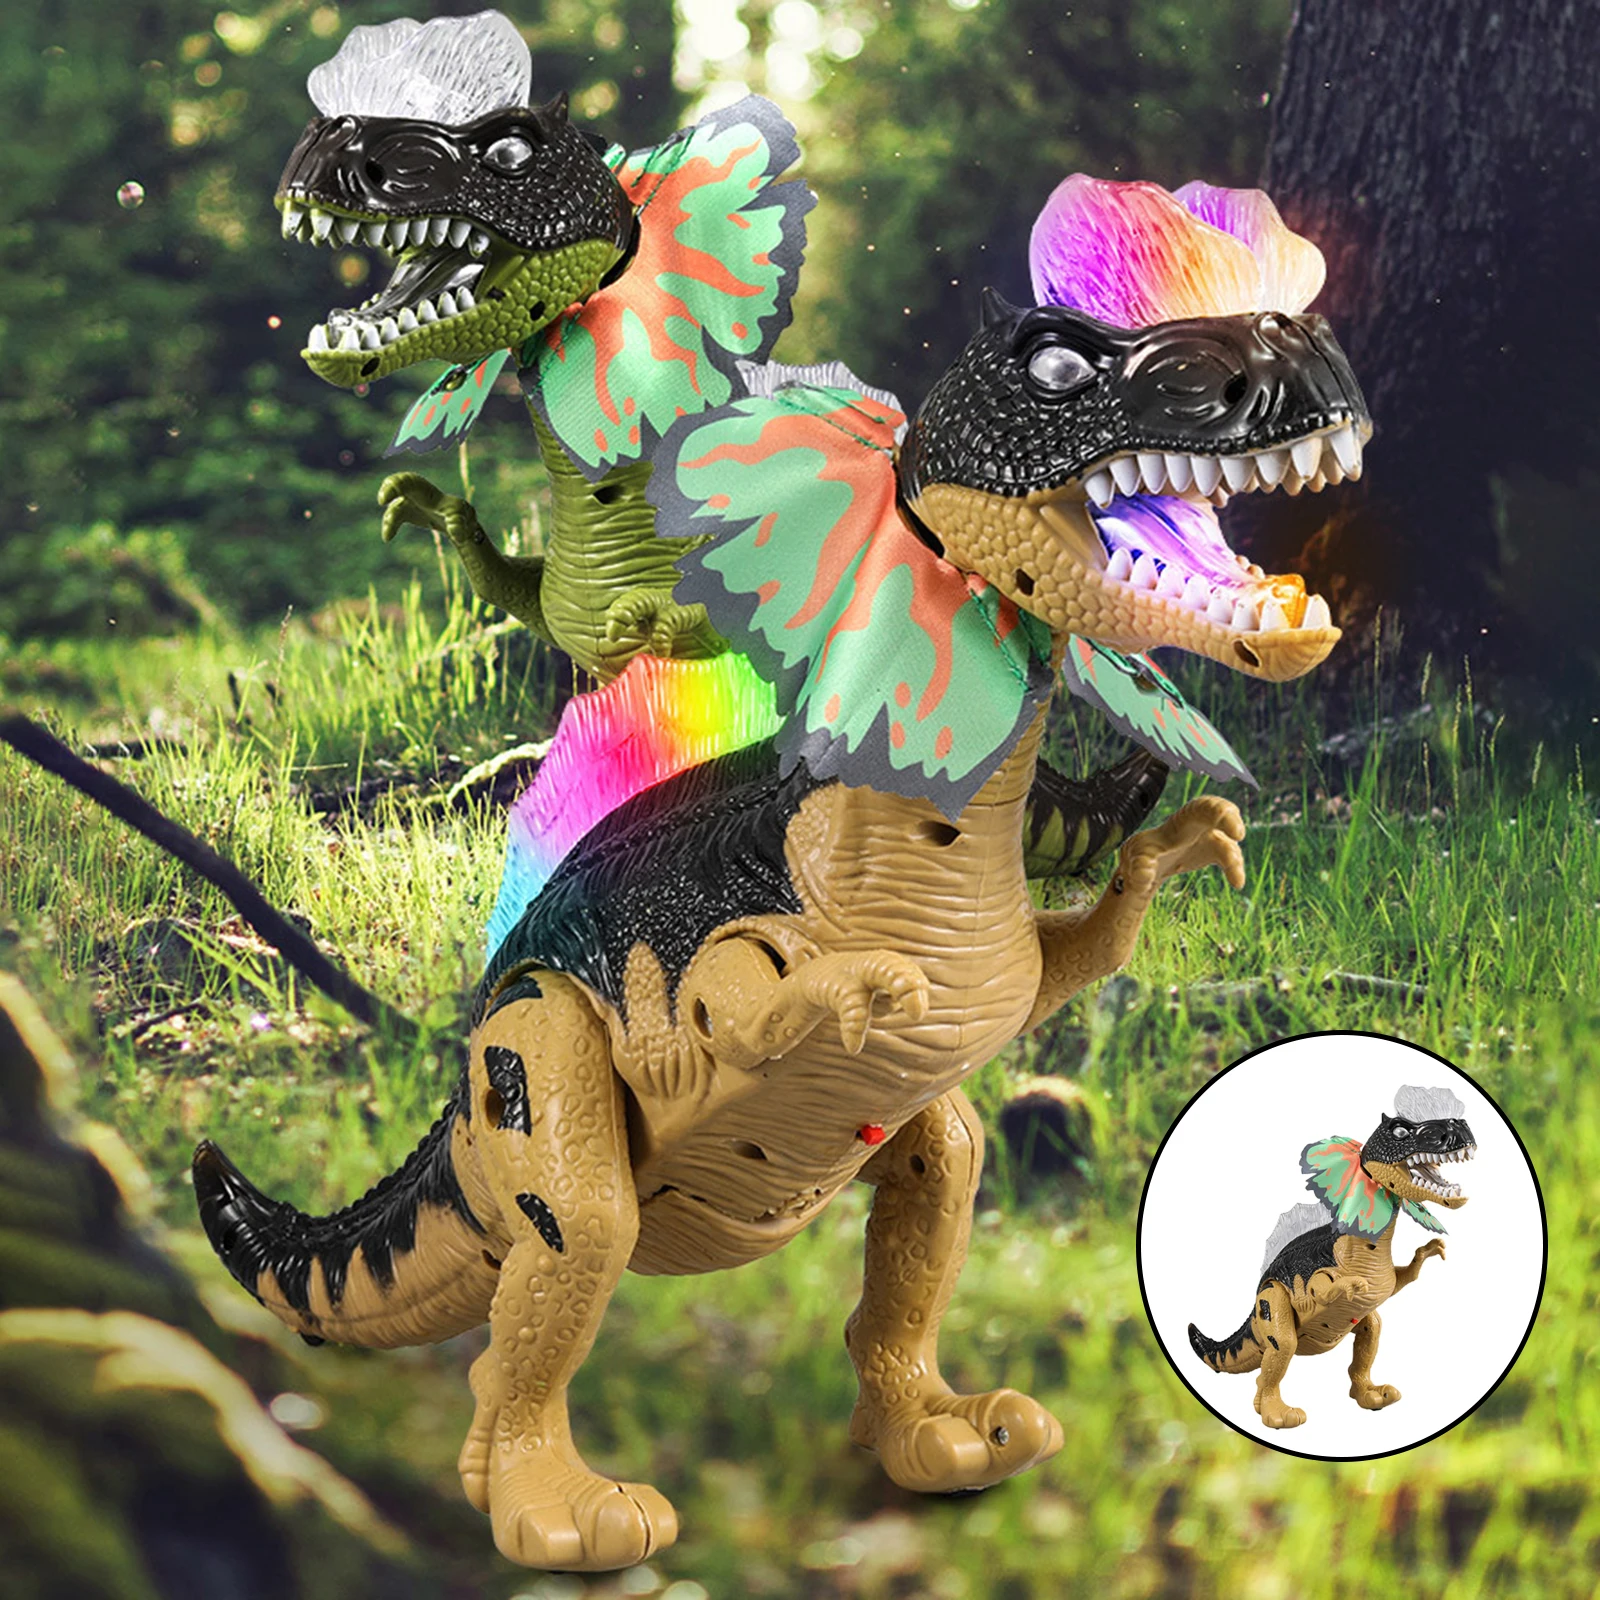 Electronic Walking Dinosaur with Walk Battery Powered Lighting for Toddlers